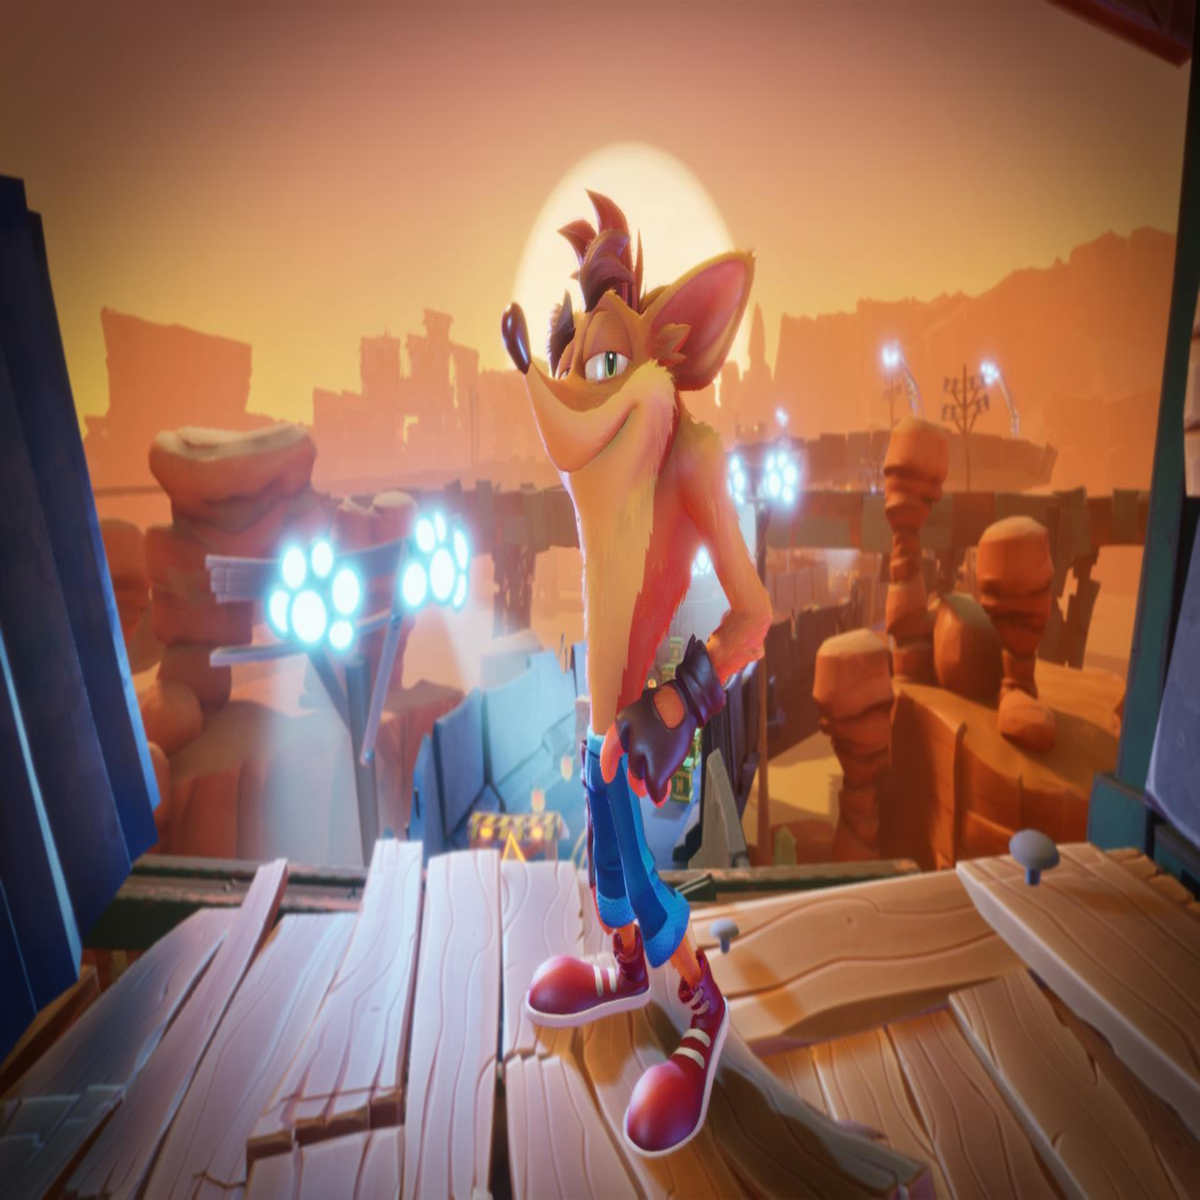 Crash Bandicoot 4: It's About Time FULL GAME Longplay (PS4) 